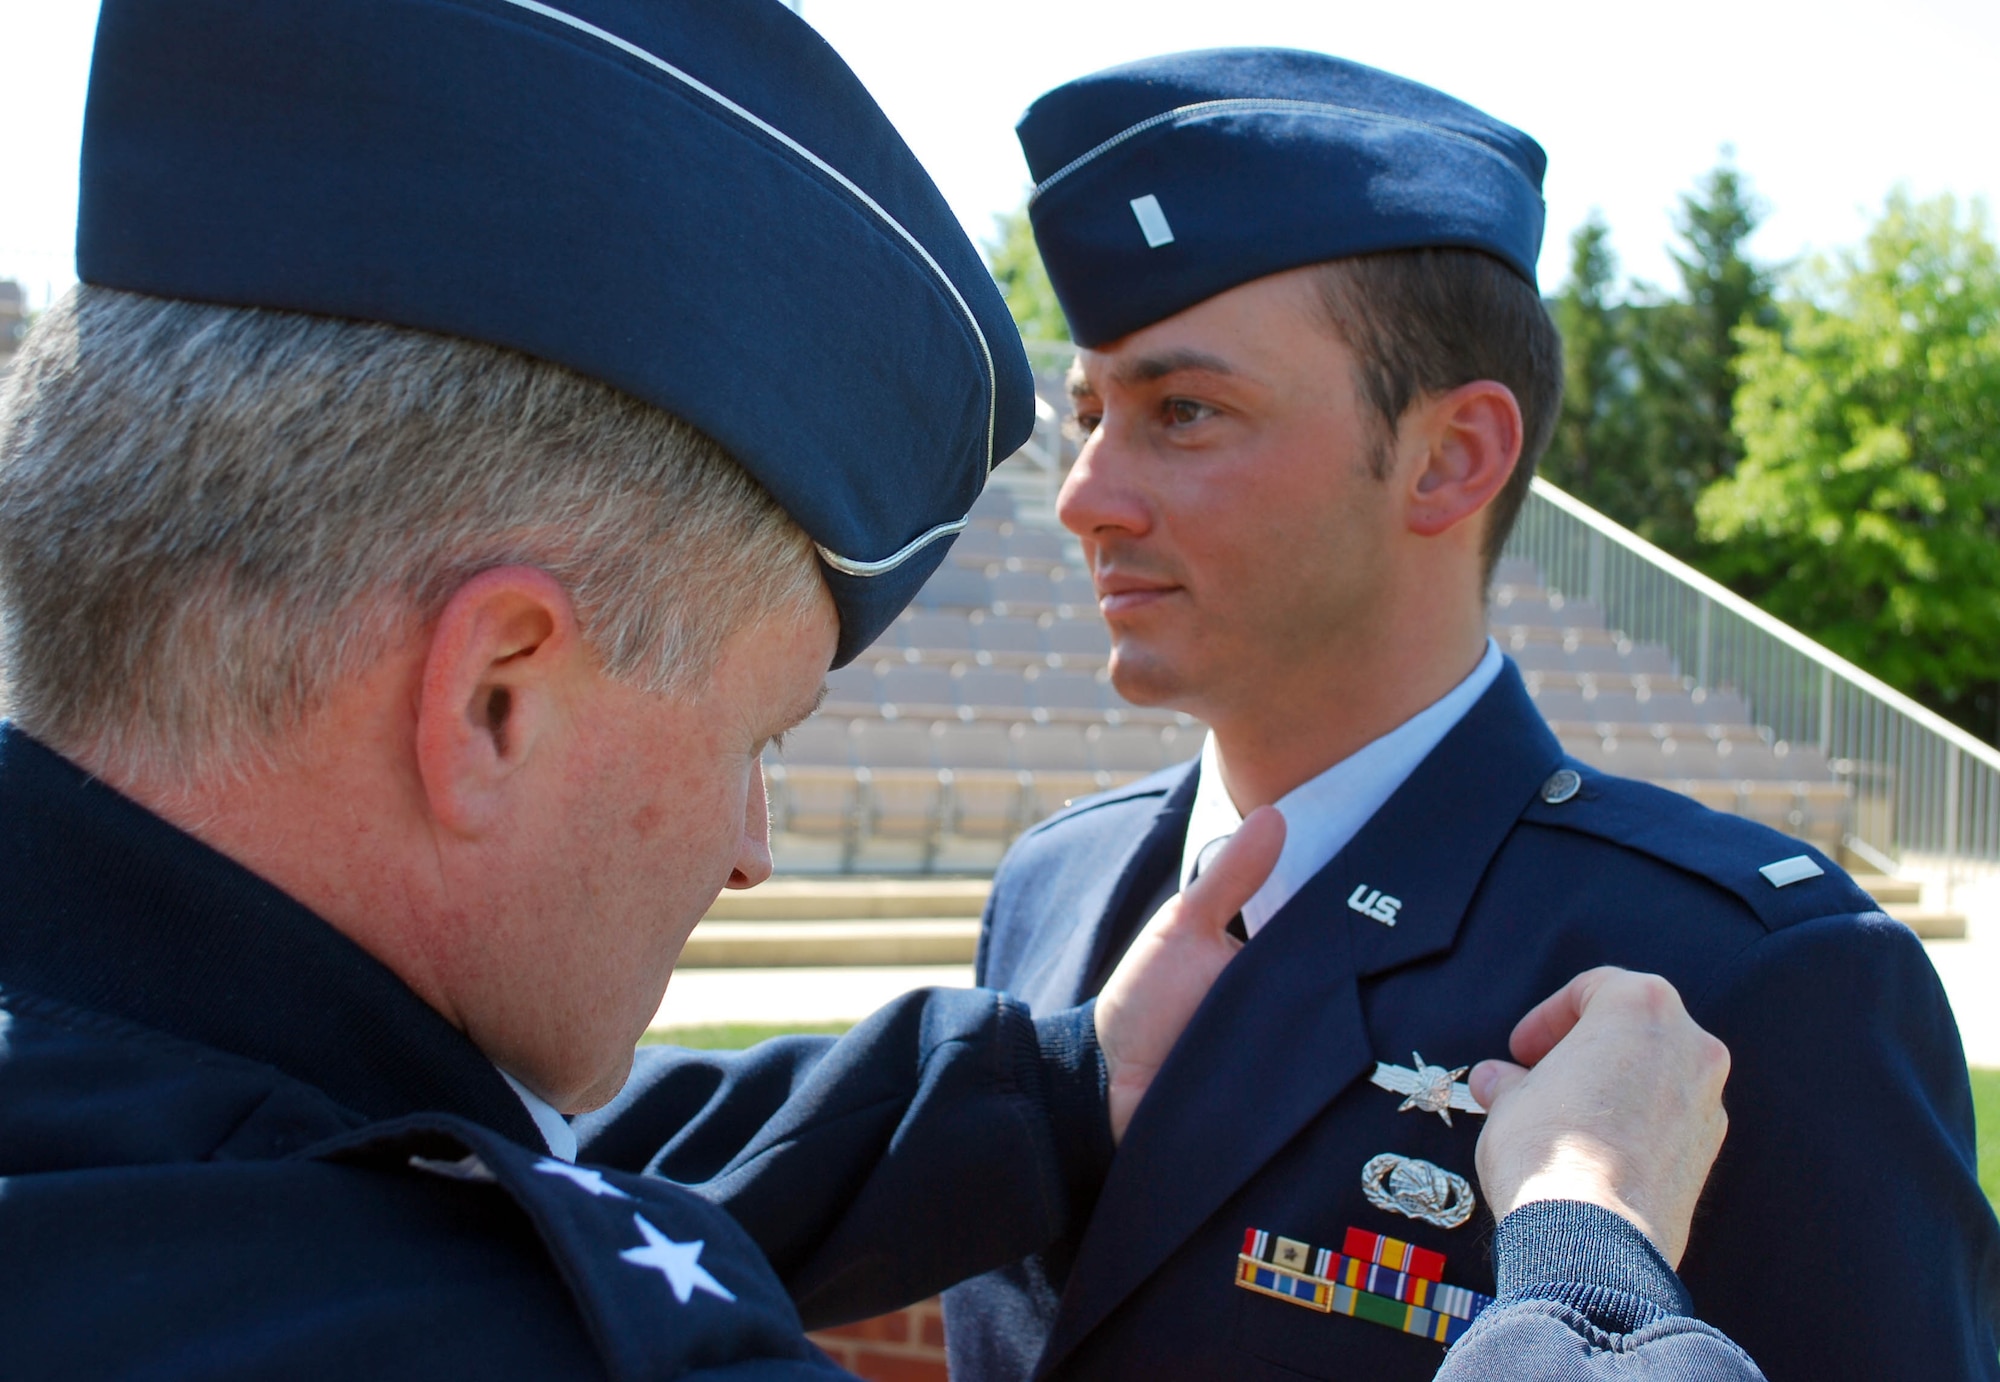 Lt. Gen. William T. Lord, chief of warfighting integration and chief information officer in the Office of the Secretary of the Air Force, pins the new cyberspace badge on 1st Lt. Thomas P. McGrevey April 30, 2010.  Lieutenant McGrevey is assigned to the 844th Communications Group at Bolling Air Force Base, D.C. (U.S. Air Force photo/Master Sgt. Russell P. Petcoff)